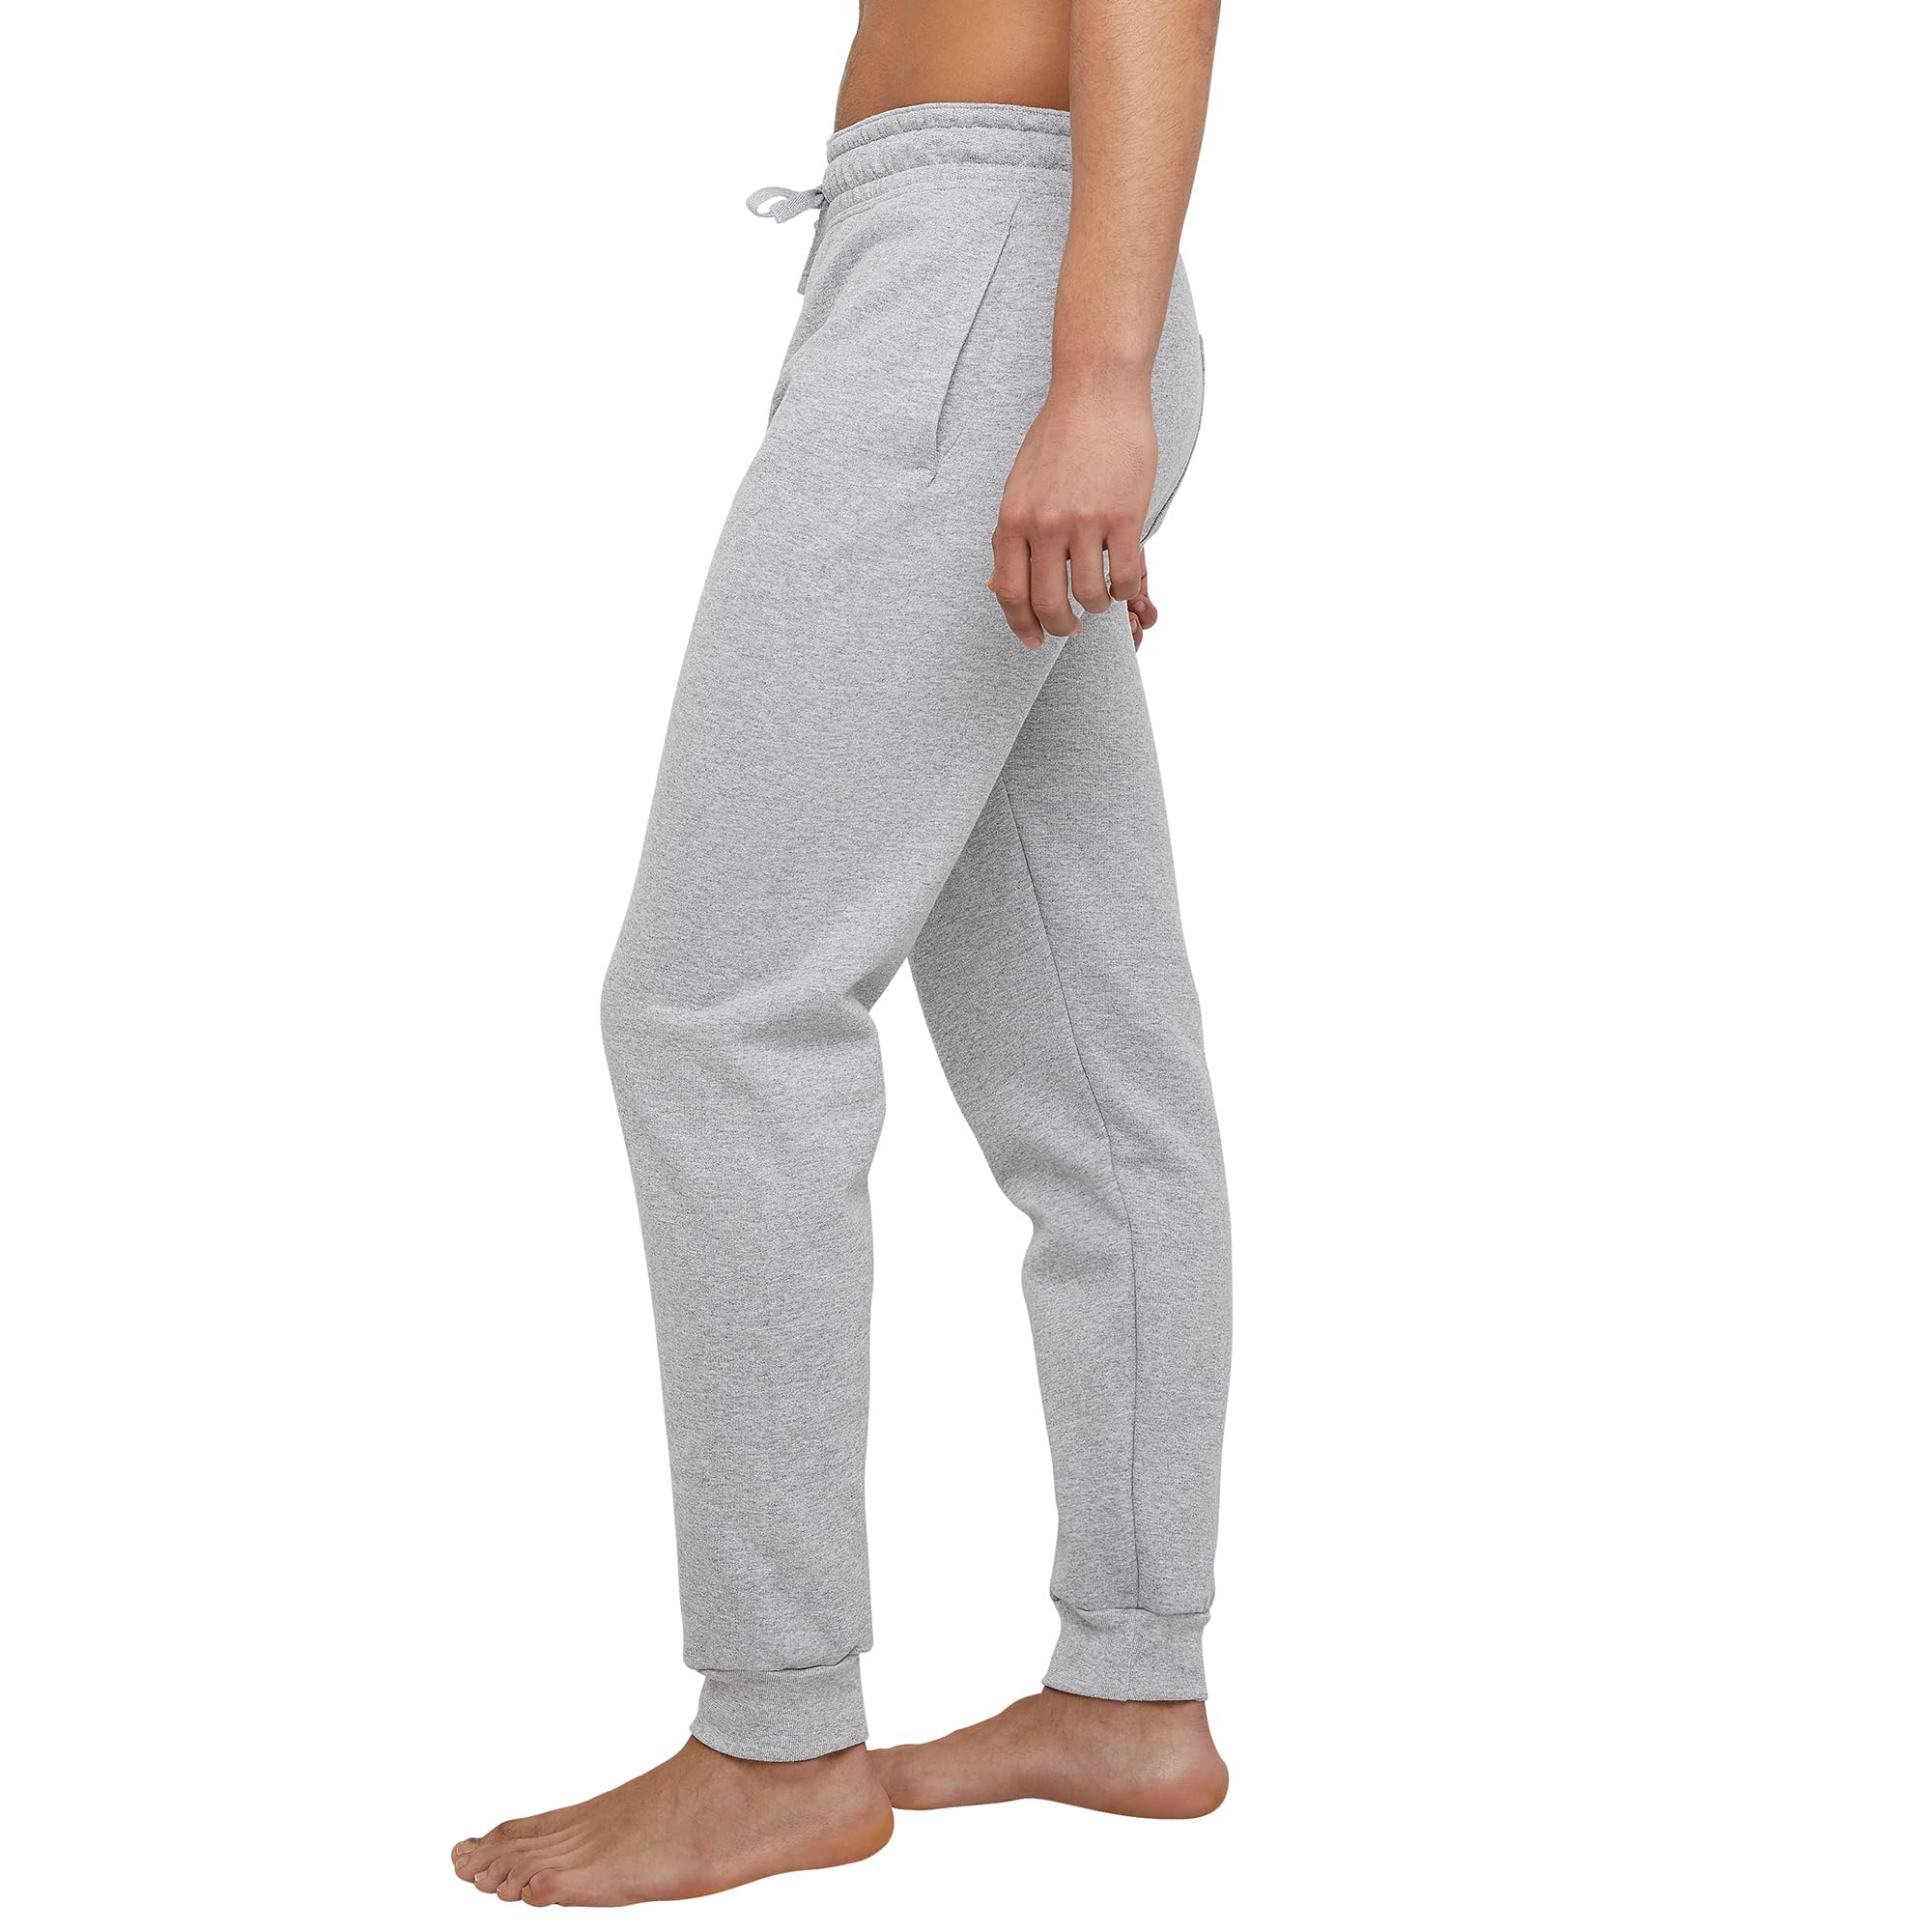 Hanes Men's Jogger Sweatpant with Pockets, Light Steel, Small $11.19